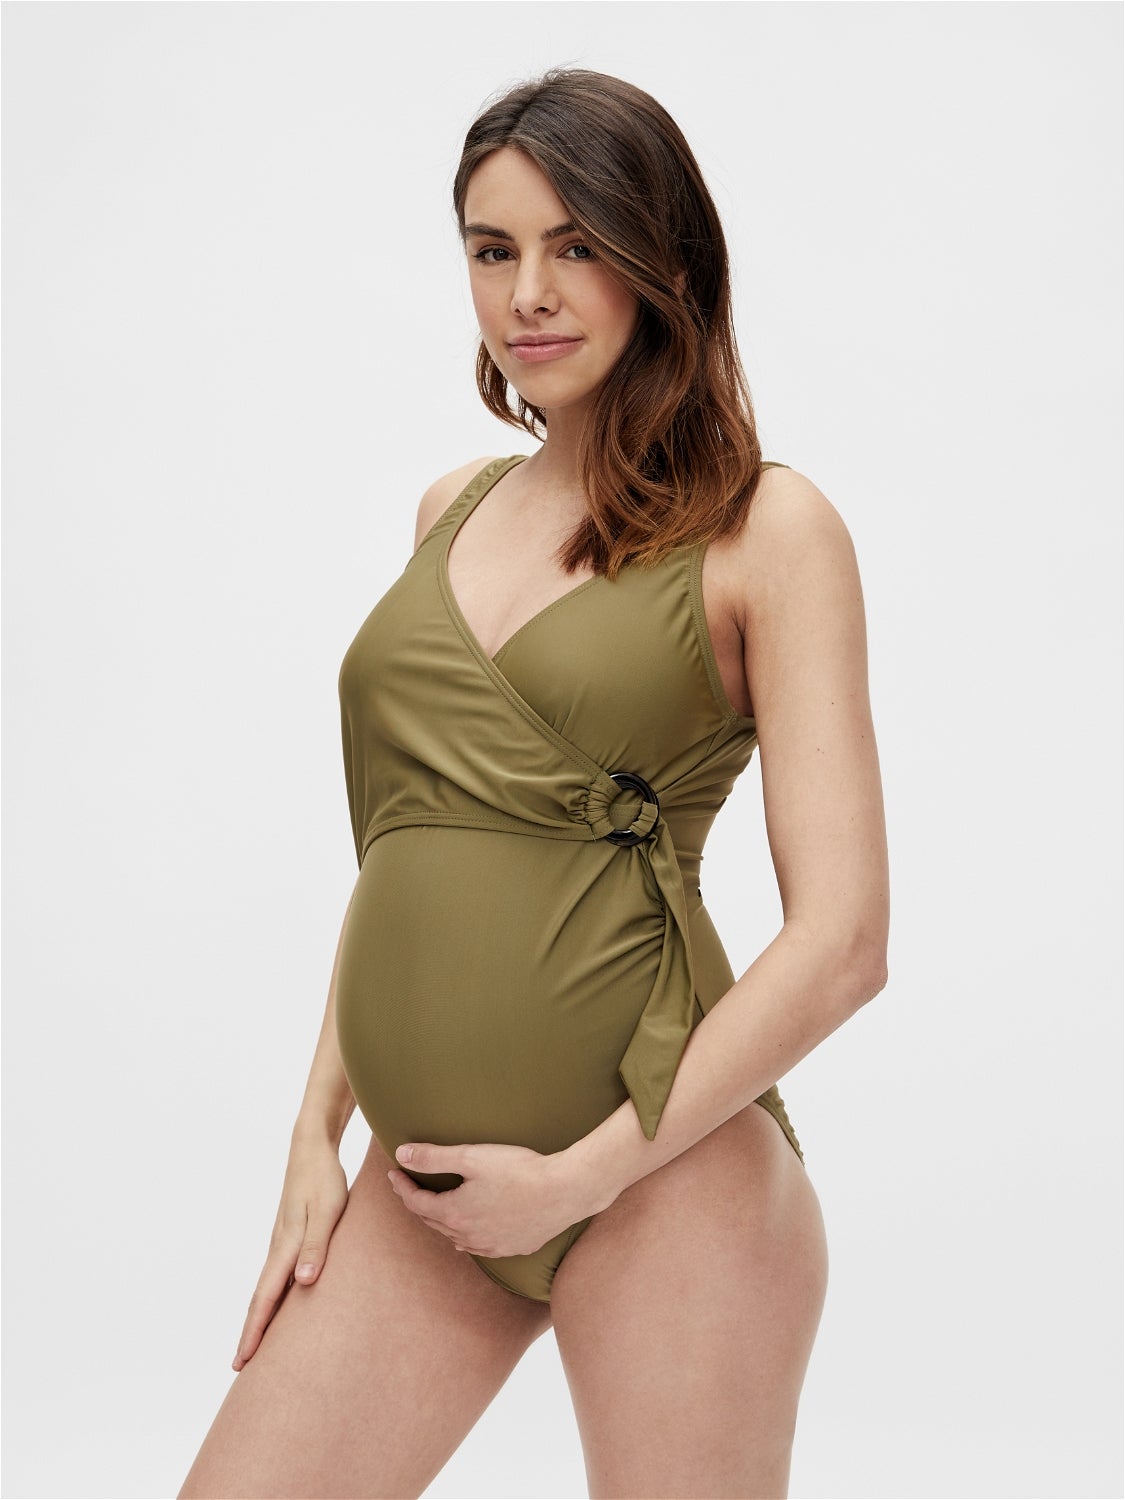 Shop Cheap Comfy Maternity Swimwear For Your Summer – Glamix Maternity